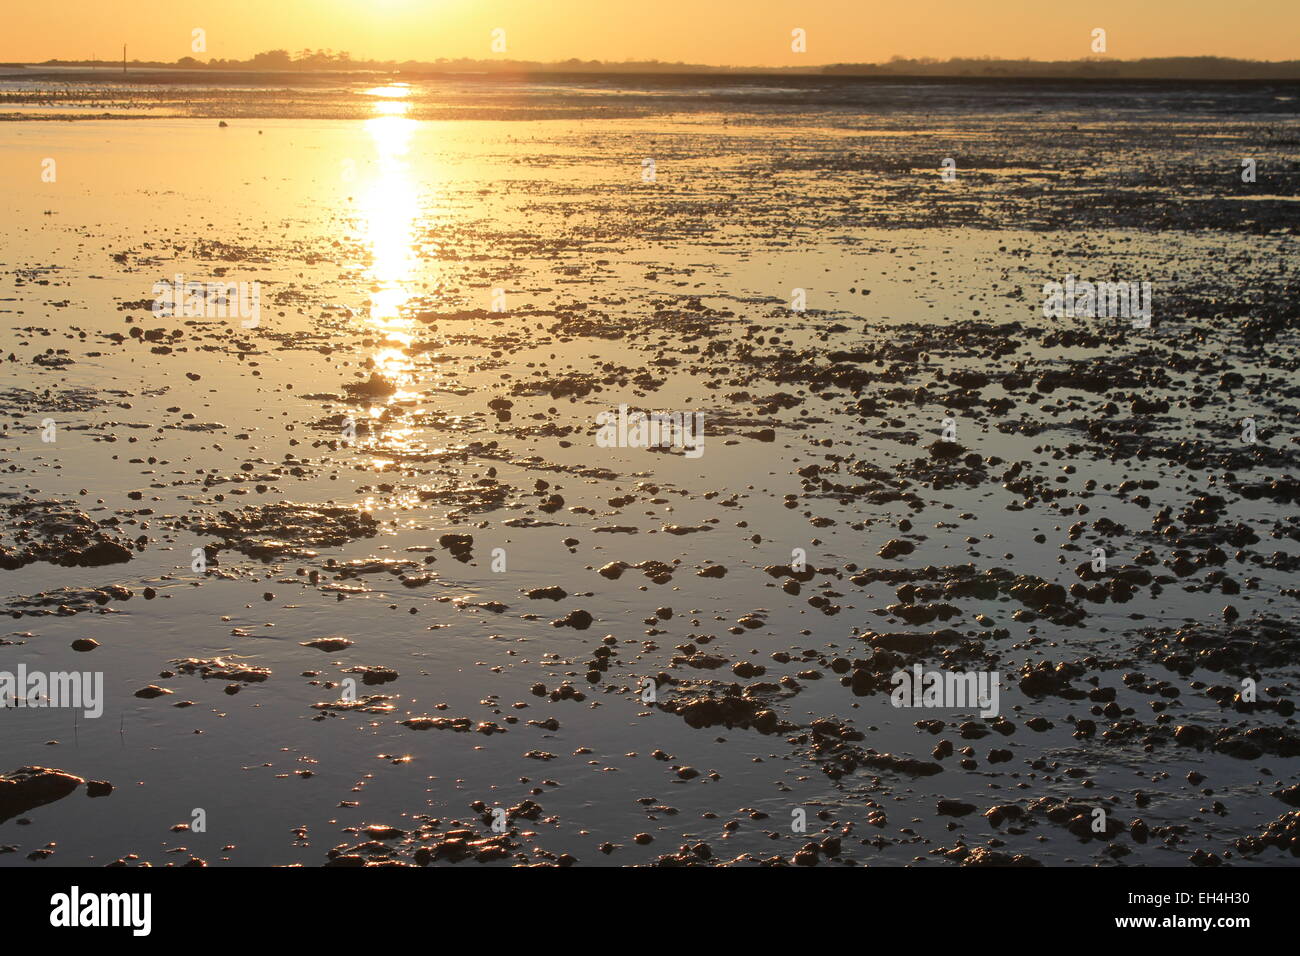 Sunset over Needs Ore Point at the mouth of the Beaulieu River from Lepe foreshore, Hampshire, England, UK Stock Photo